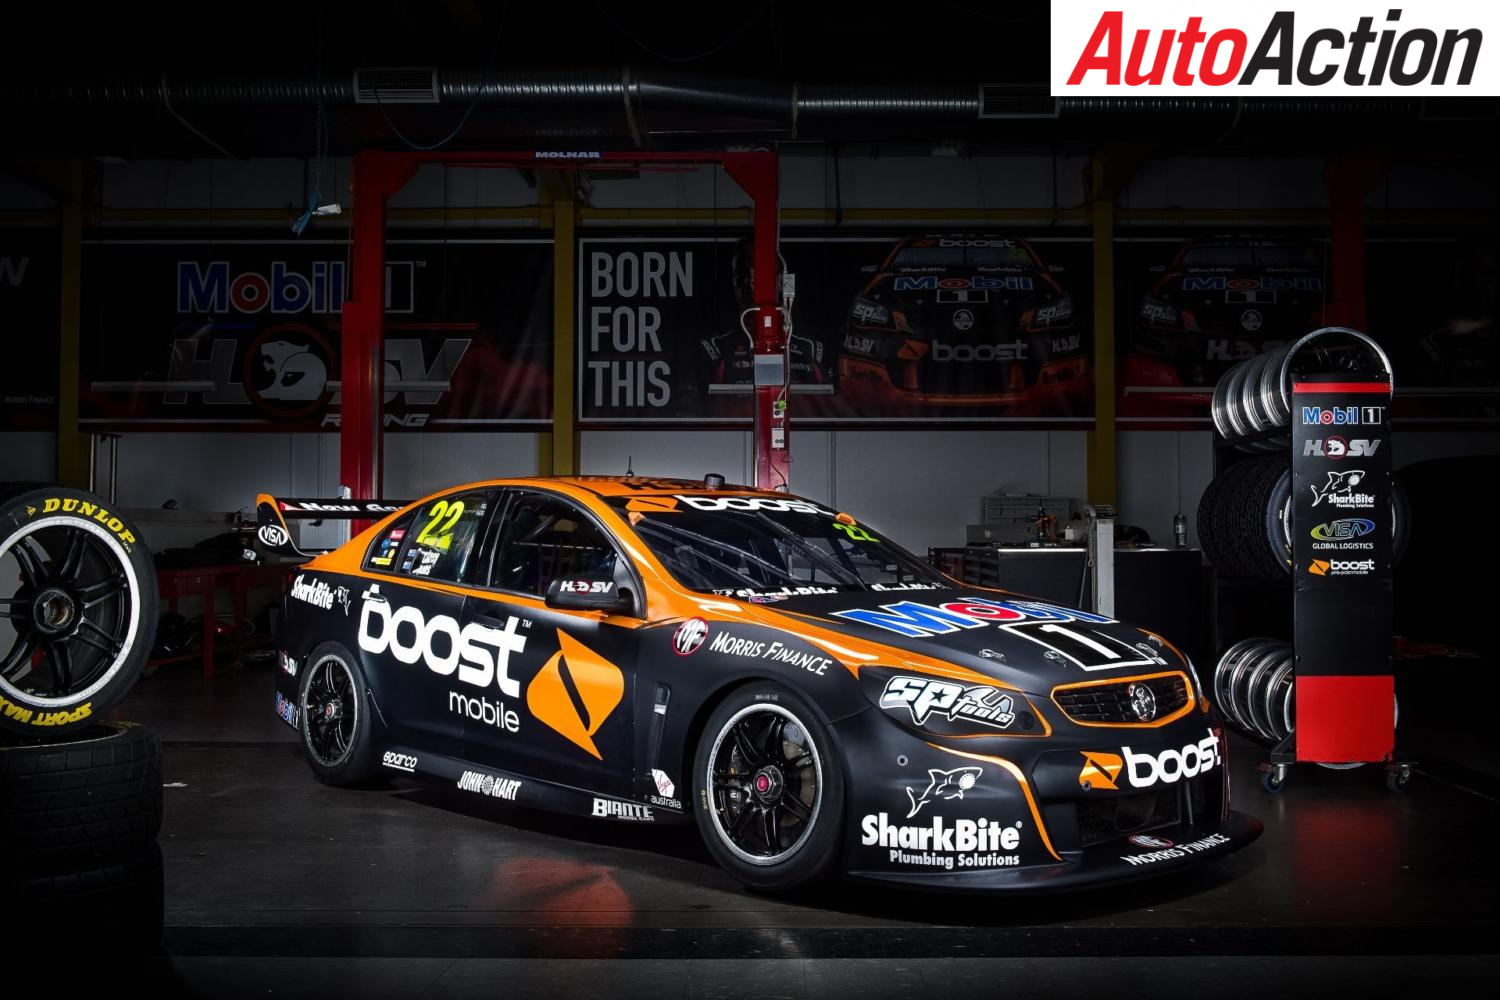 New look for James Courtney and Jack Perkins - Photo: Supplied